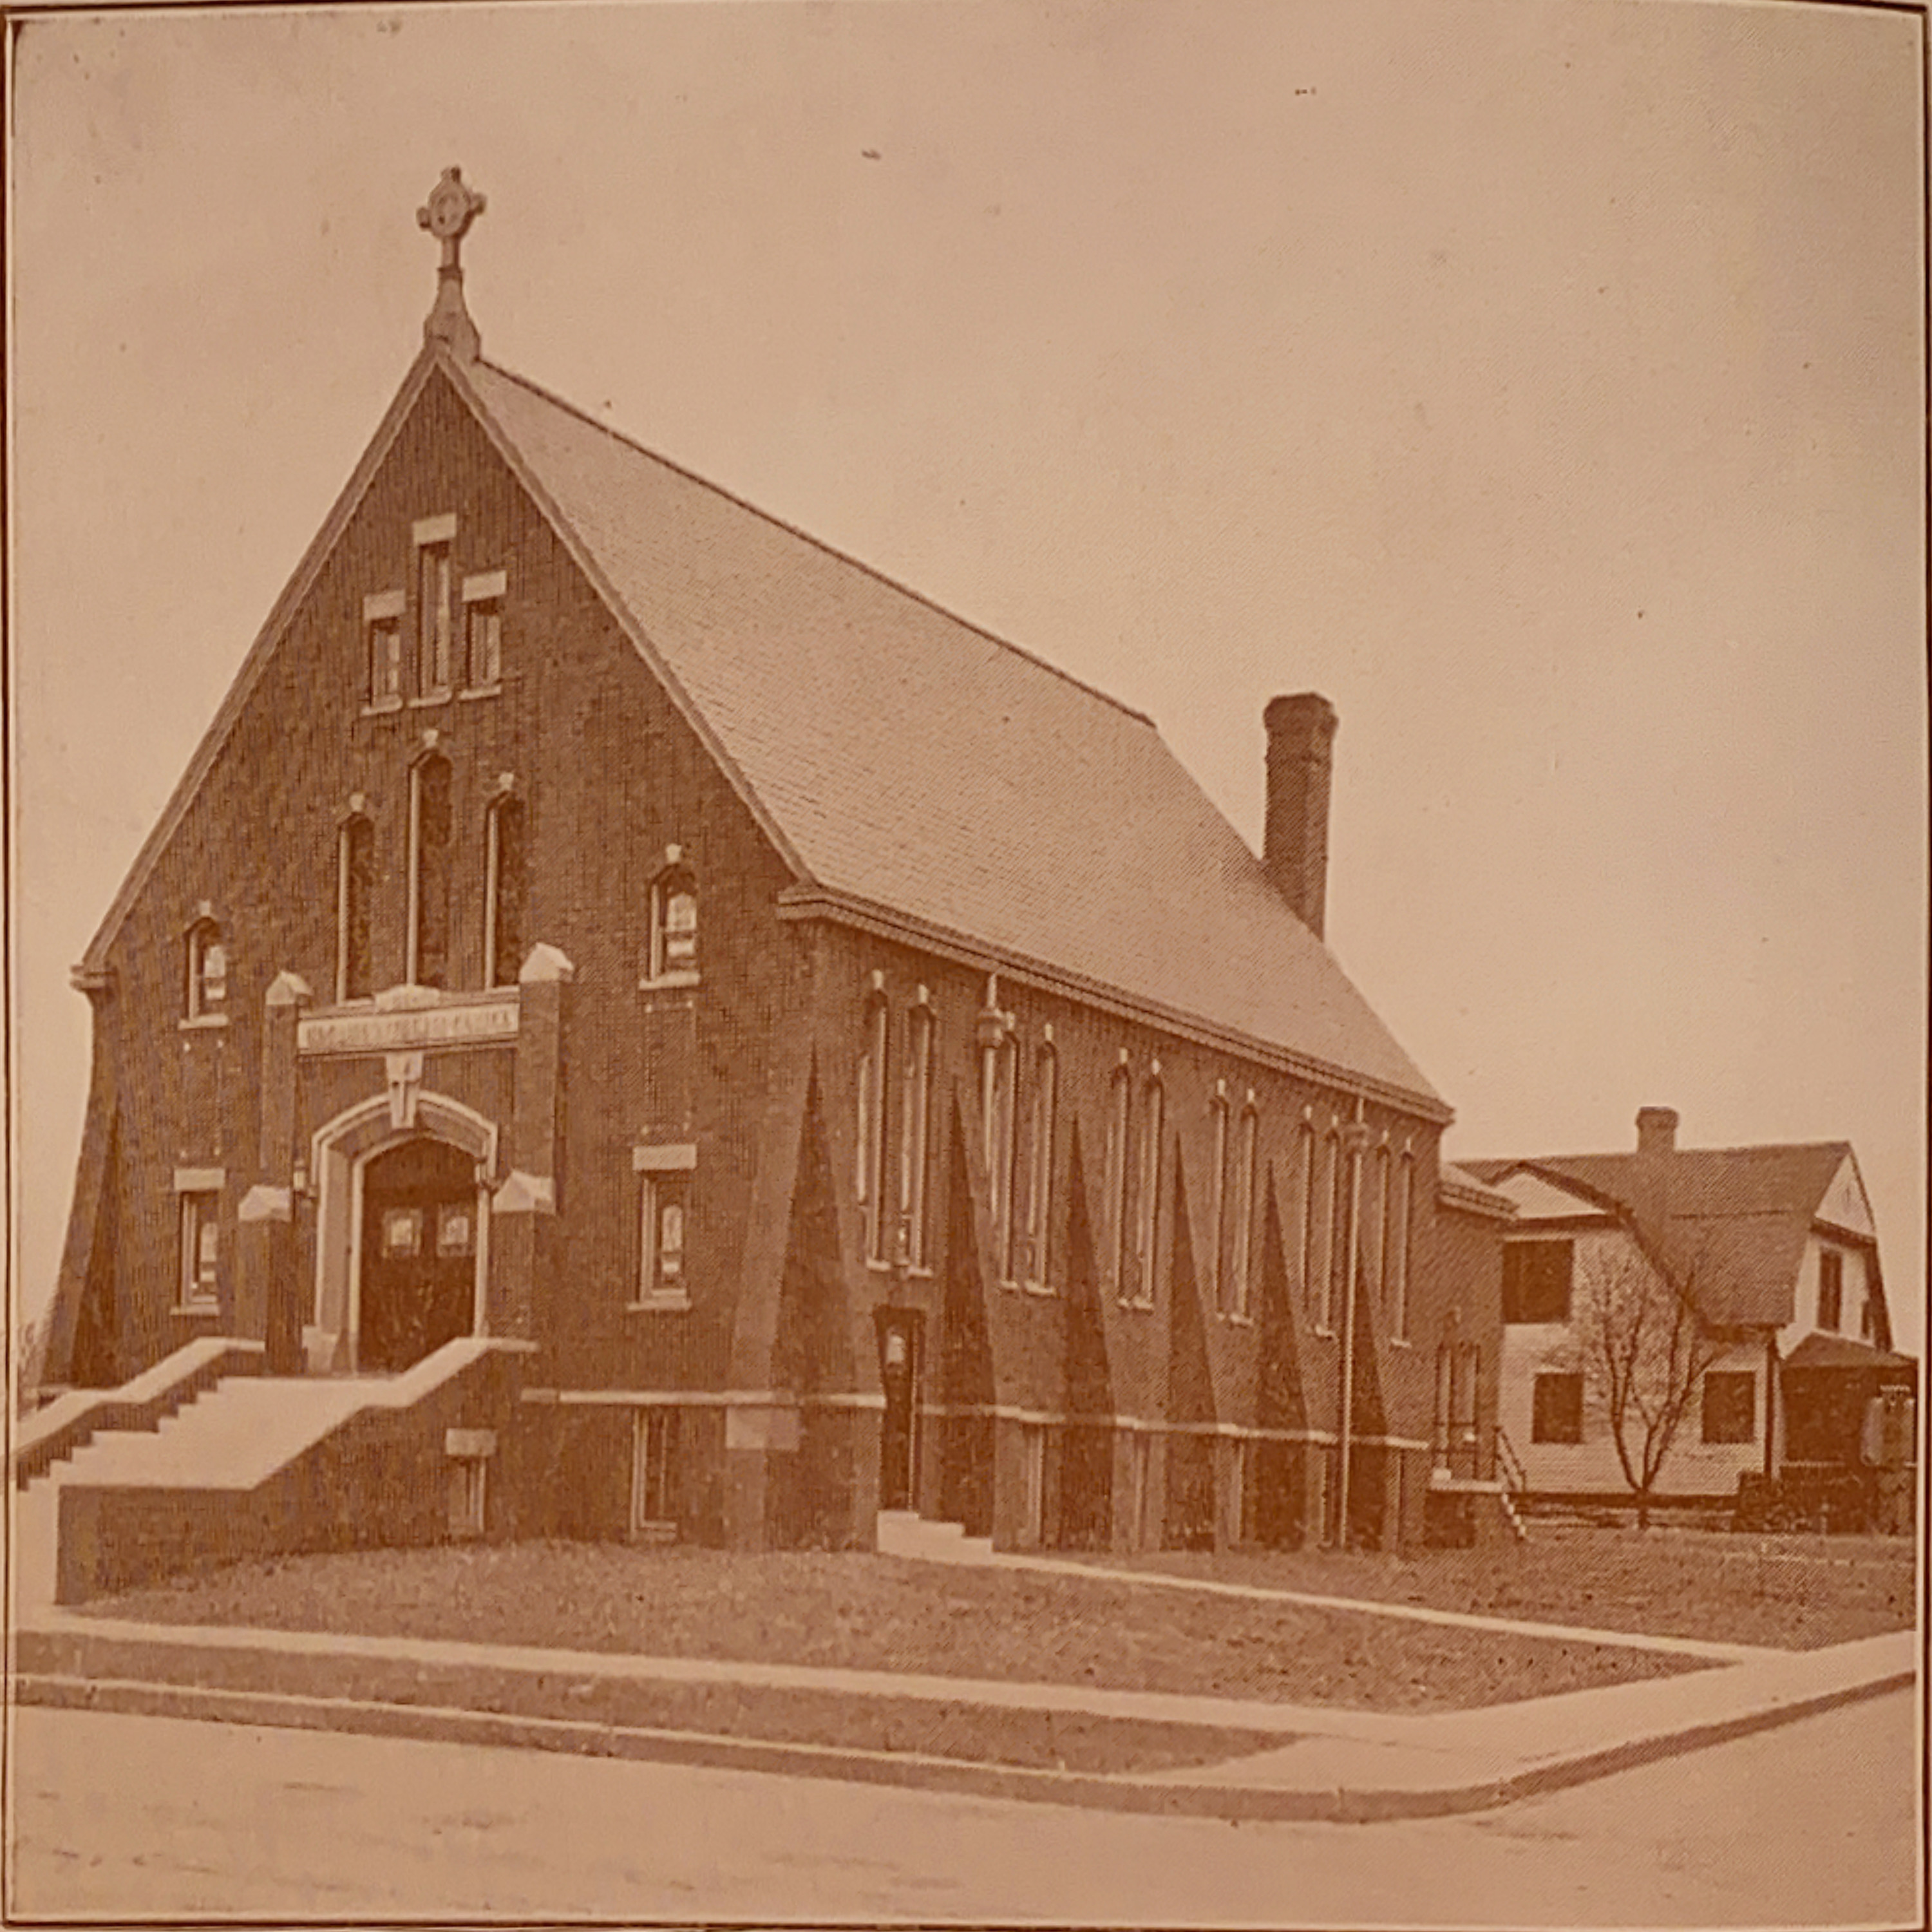 The first unit of the current structure was dedicated in 1922, and could seat 425 adults and their children. In the background, the newly-constructed church parsonage is visible.